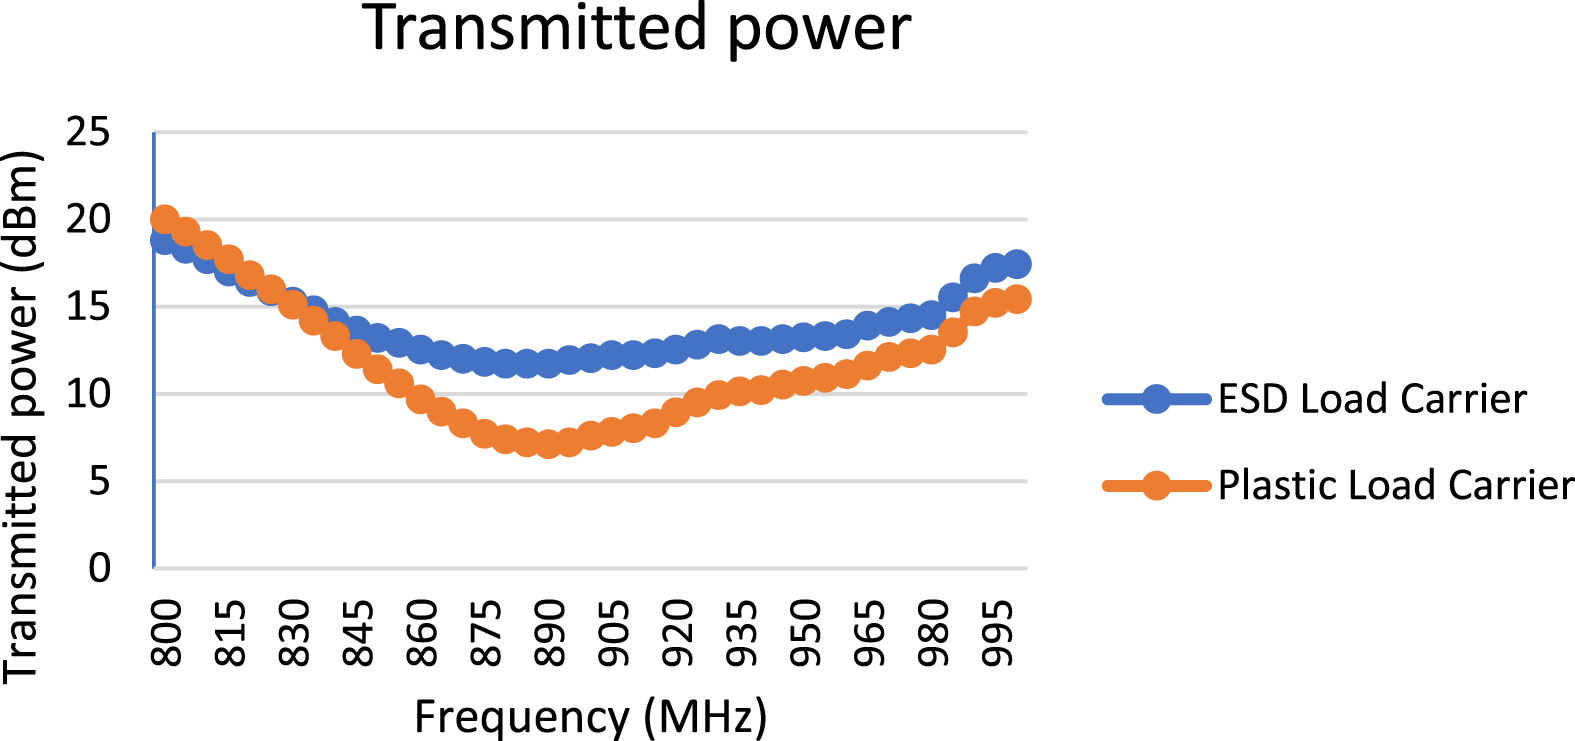 Transmitted power ESD vs. plastic load carrier.